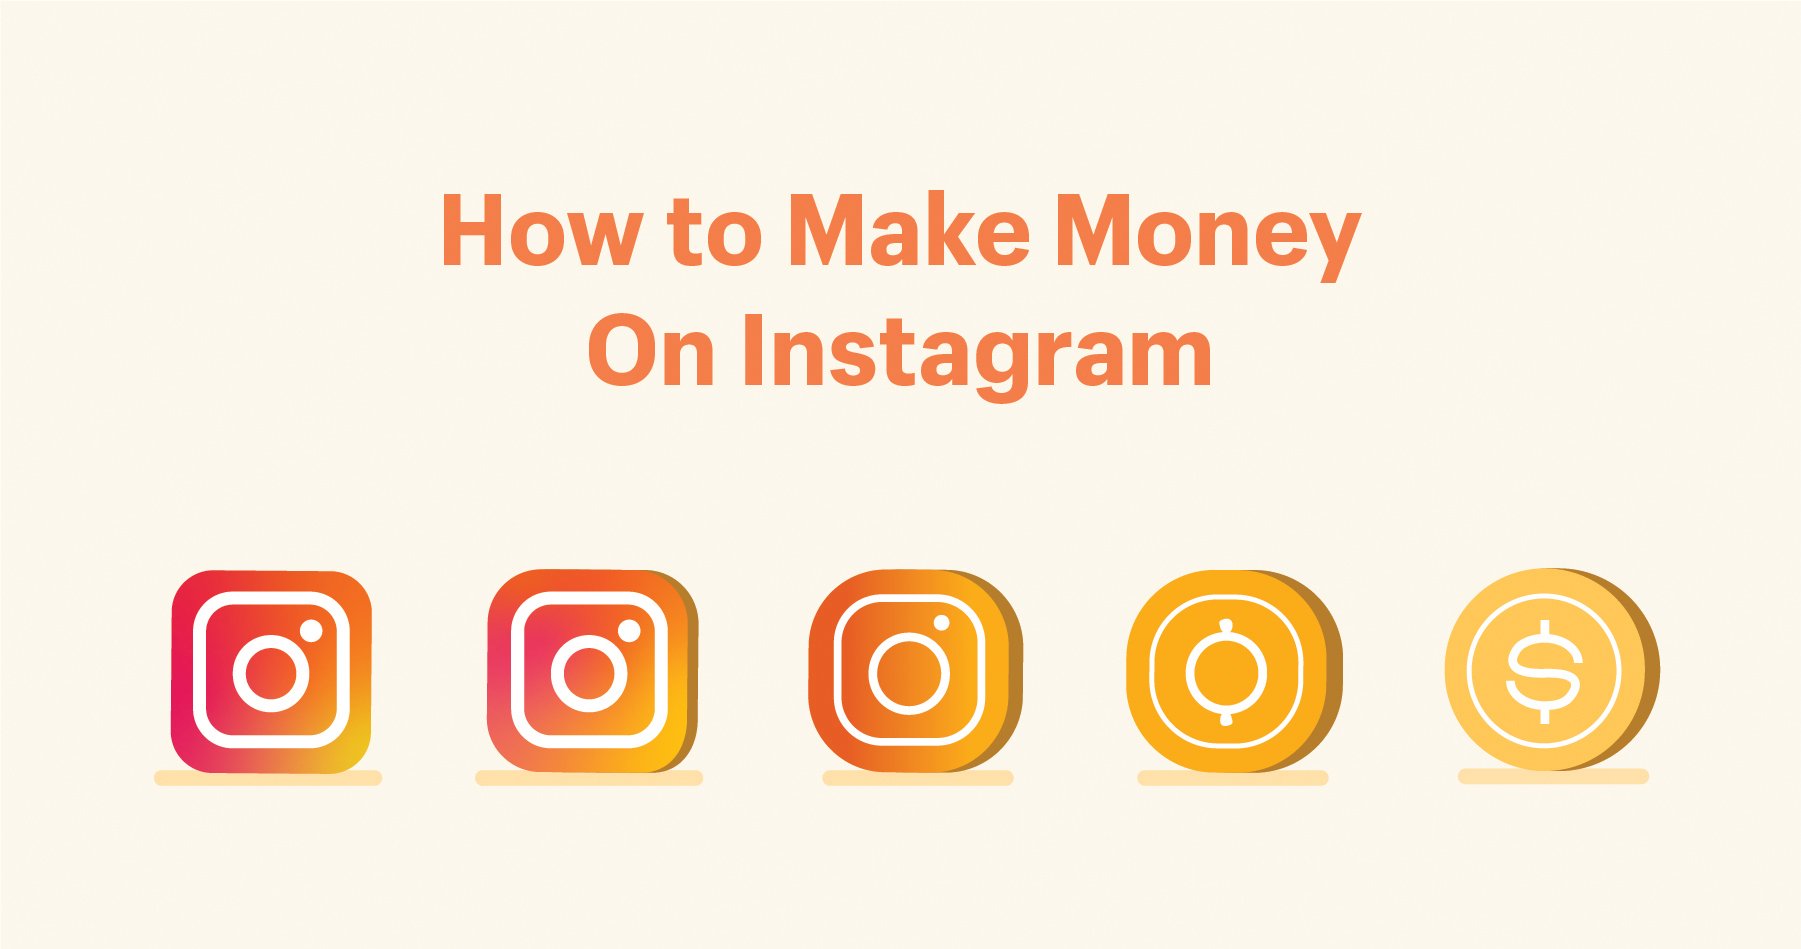 consider, 10 things to make money on tiktok in thanks for